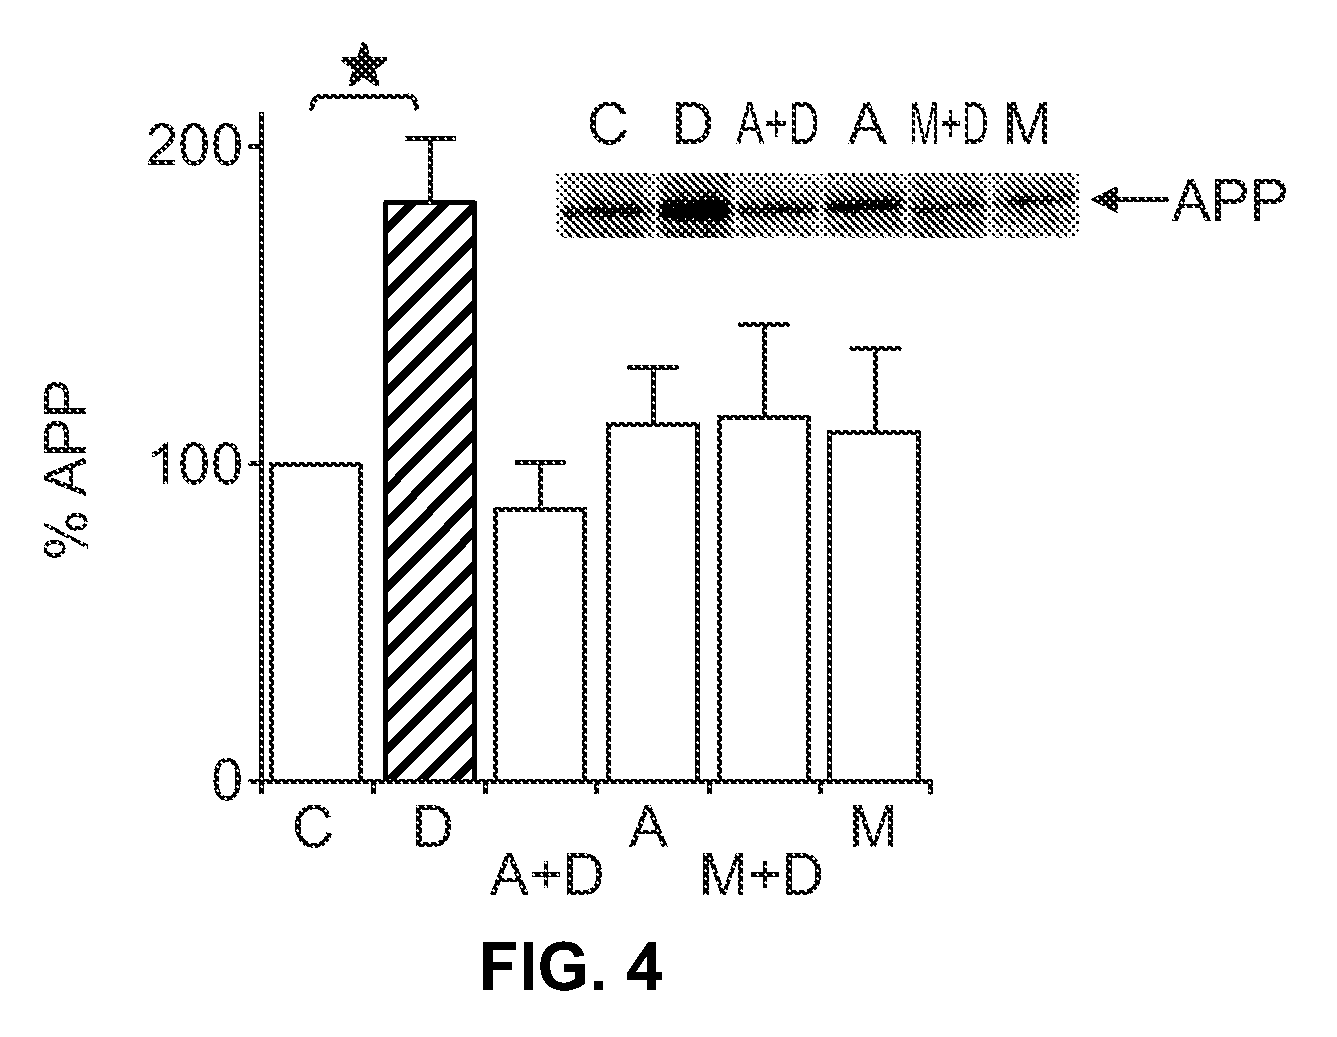 Methods for Inhibiting Amyloid Precursor Protein and Beta-Amyloid Production and Accumulation